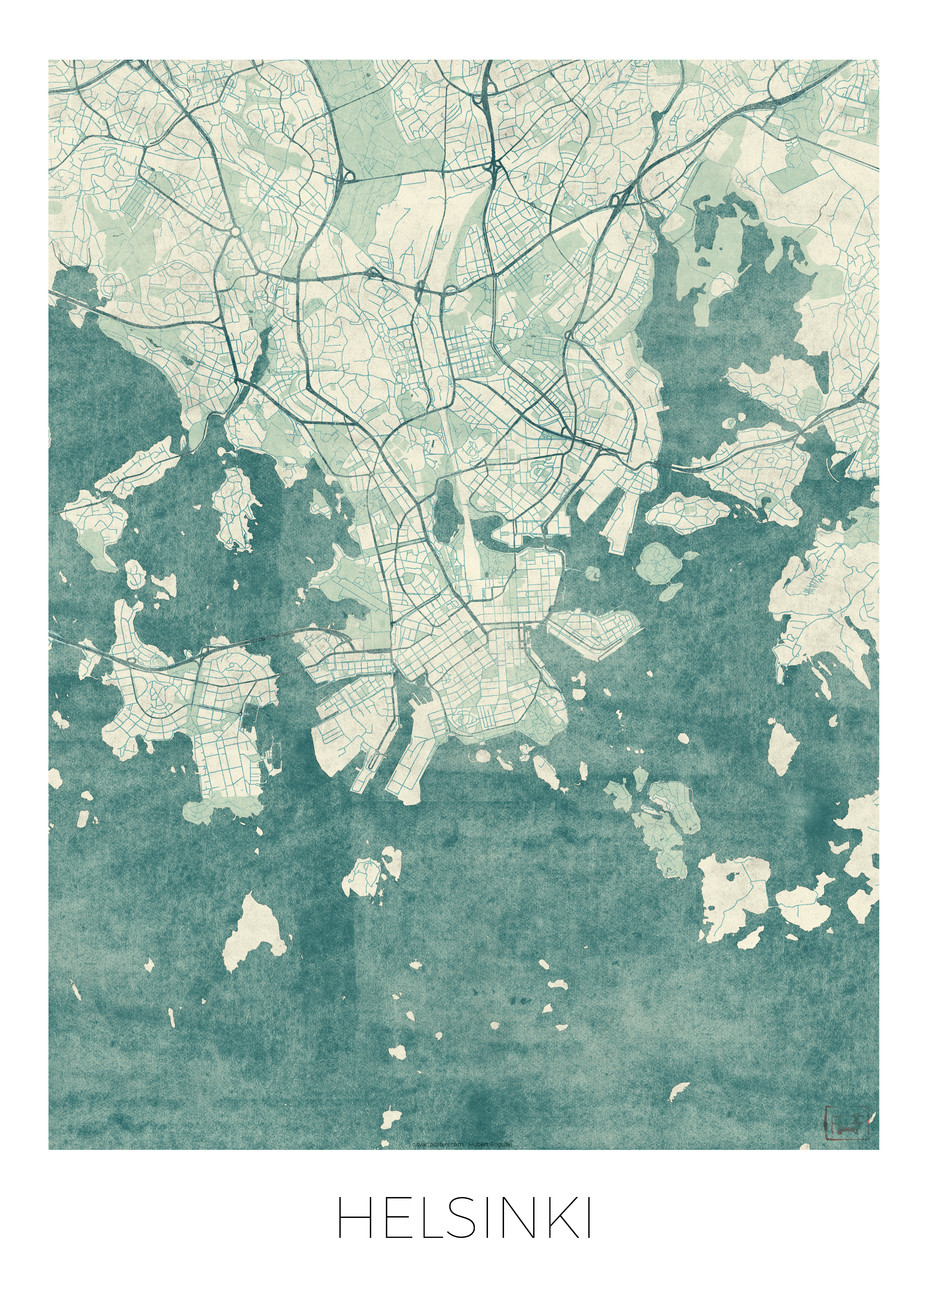 Map of Helsinki ǀ Maps of all cities and countries for your wall